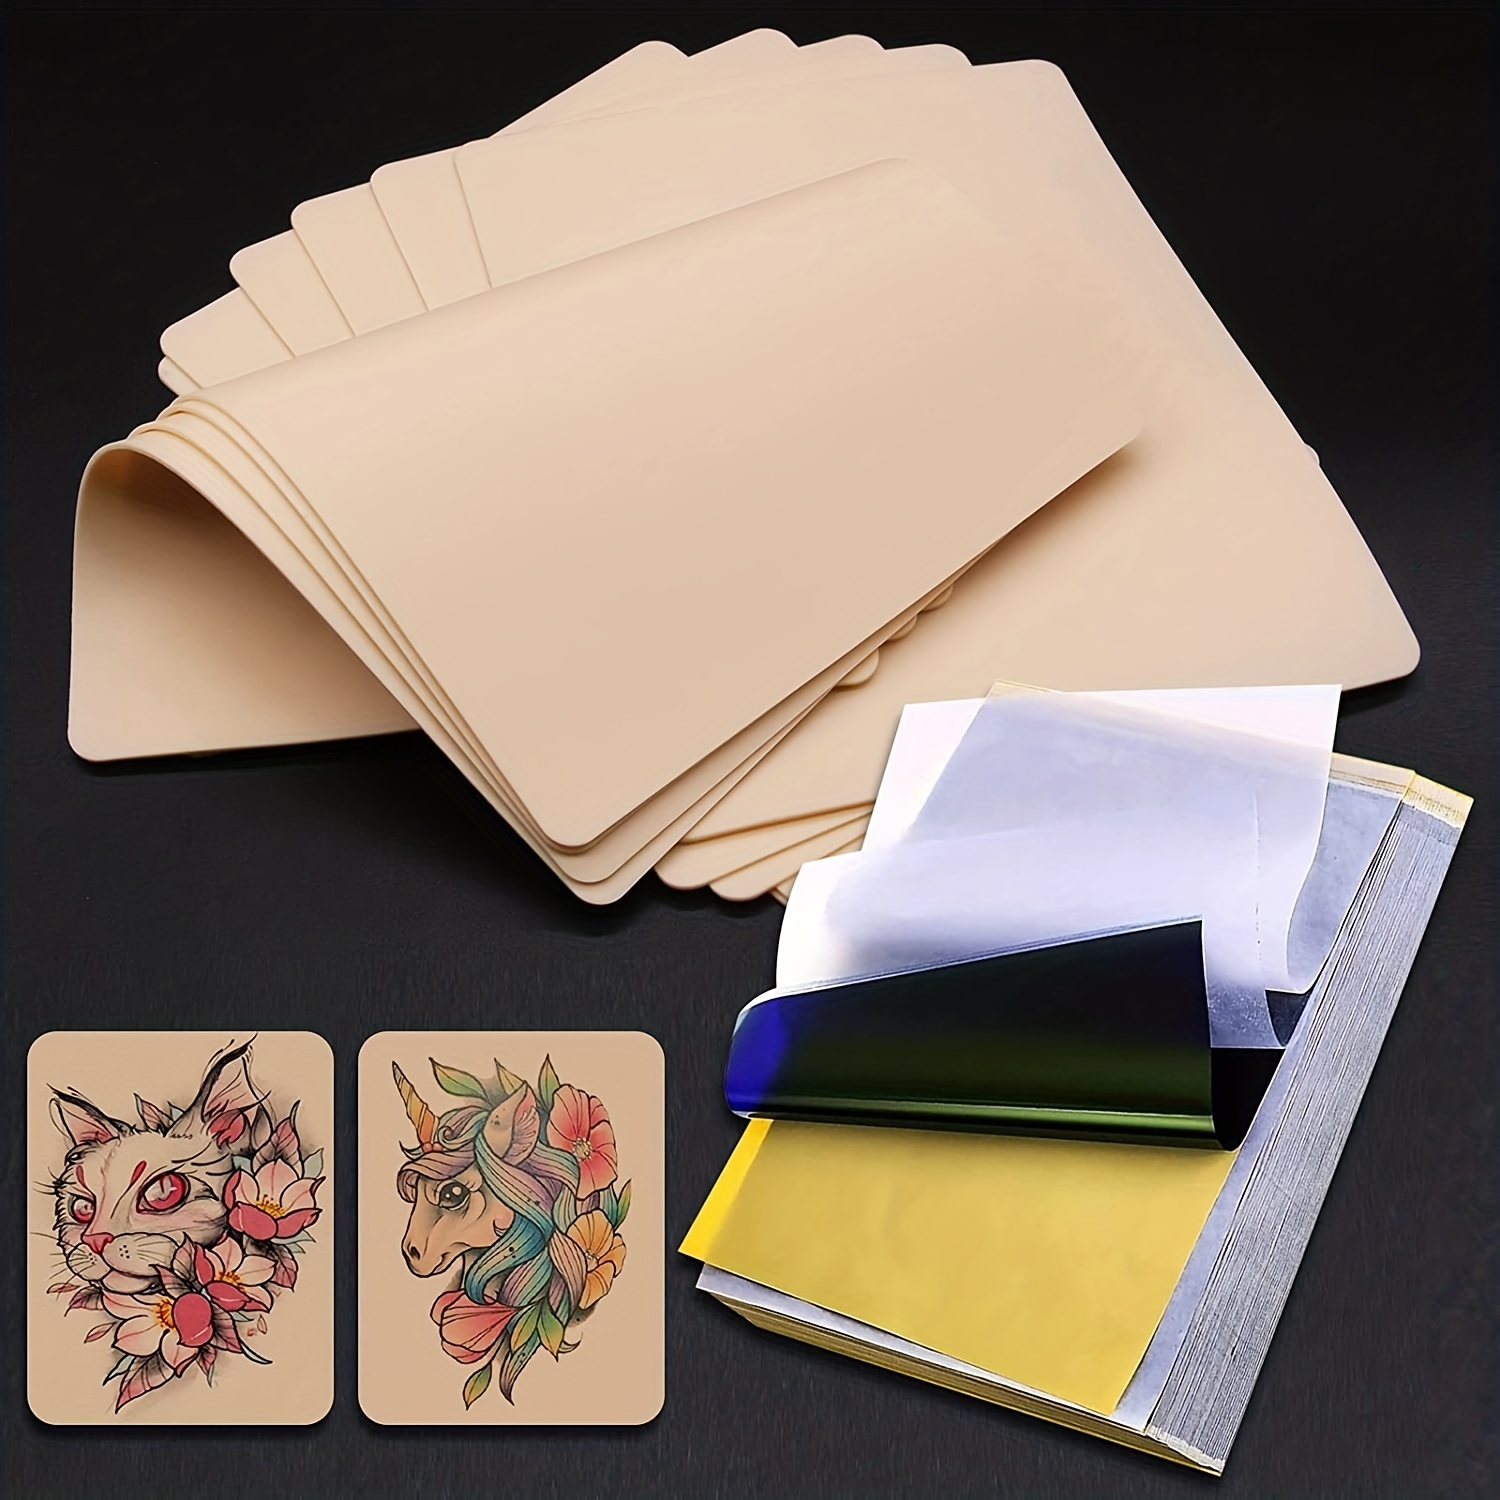 

5/10pcs Tattoo Practice Skins With Transfer Paper, Tattoo Fake Skin And Stencil Paper Kit Includes Tattoo Paper And Double Sided Blank Tattoo Skin Practice, For Beginners And Experienced Artists